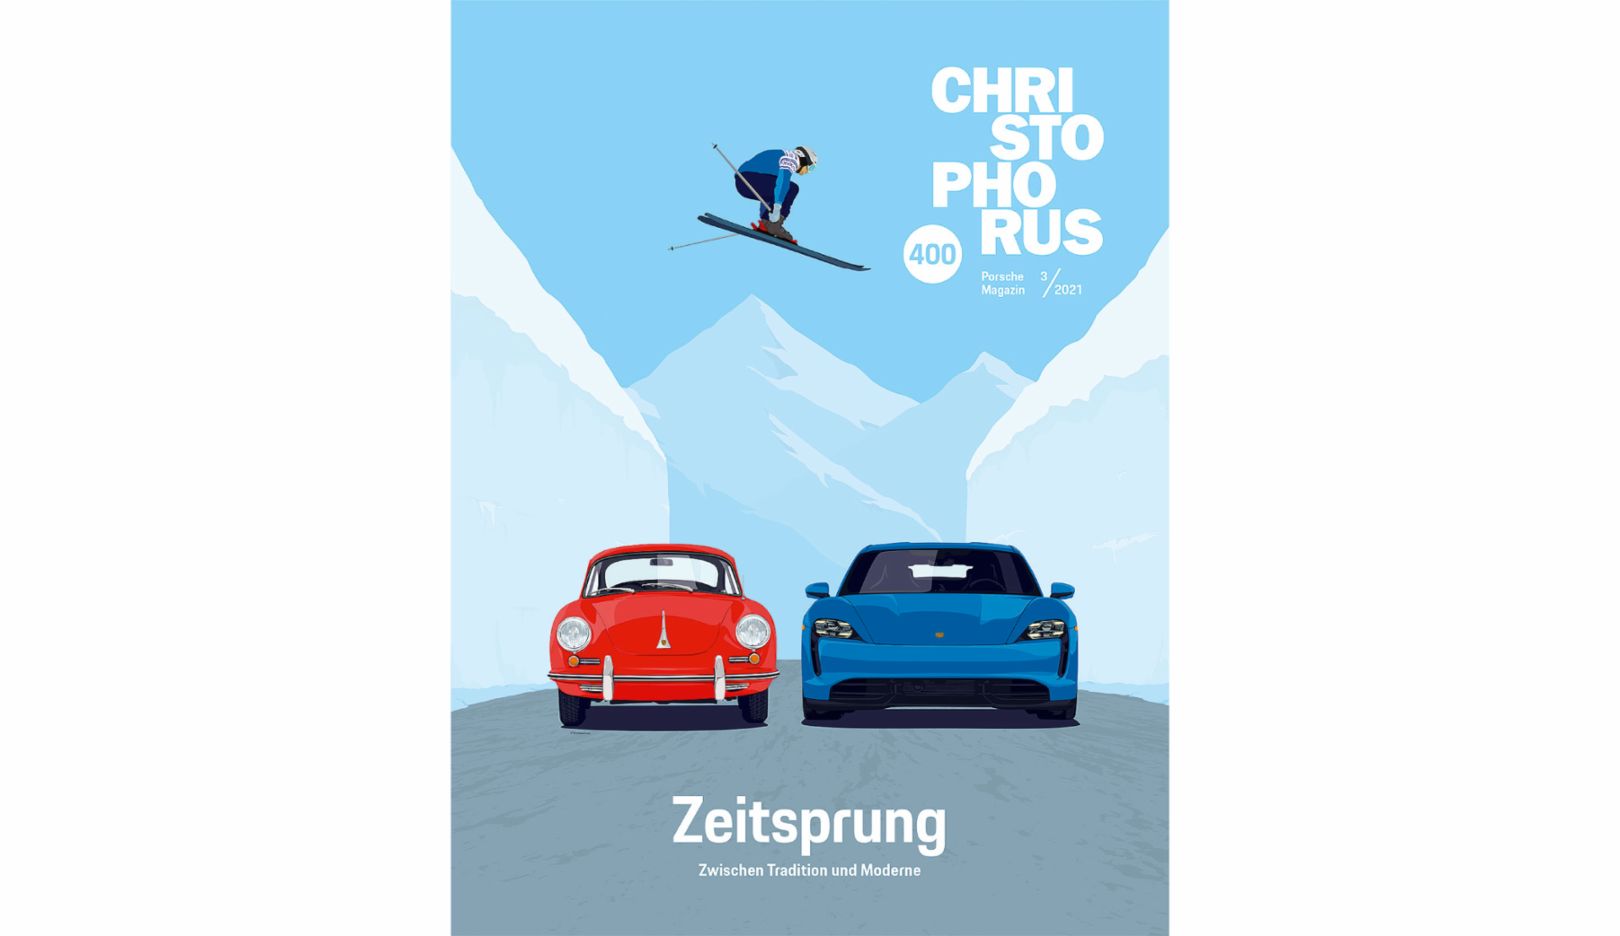 The current cover shows a new interpretation of the iconic ski jump over a Porsche 356 – this time featuring a Porsche Taycan Turbo. In the process of creating the cover image for the anniversary edition, illustrator Jeffrey Docherty experimented and followed a variety of approaches.